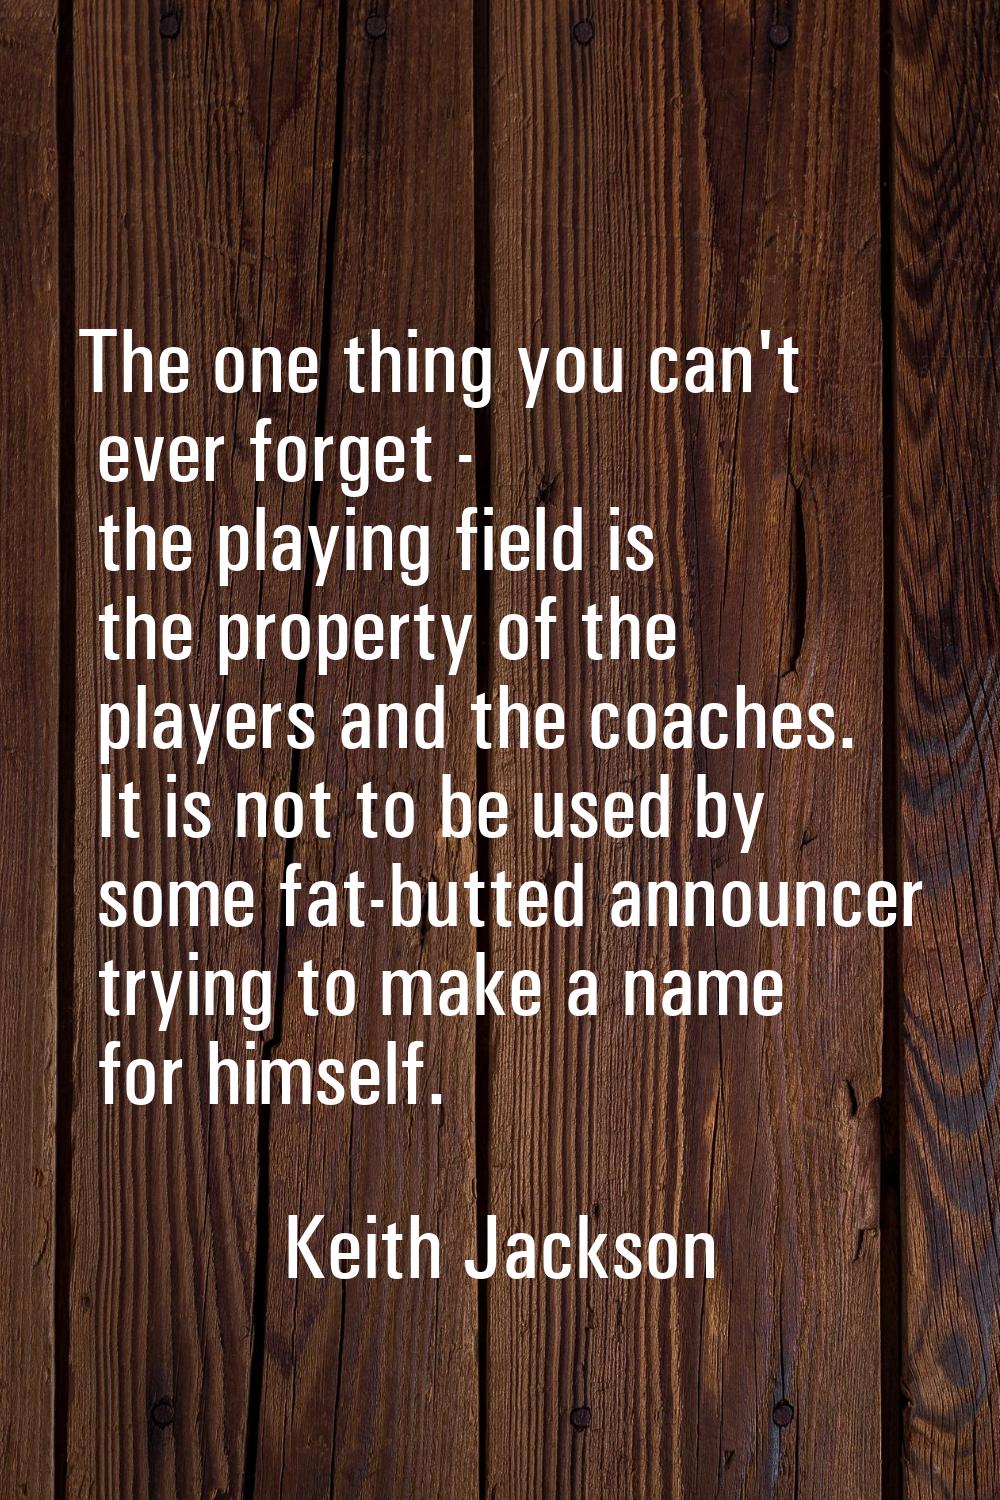 The one thing you can't ever forget - the playing field is the property of the players and the coac